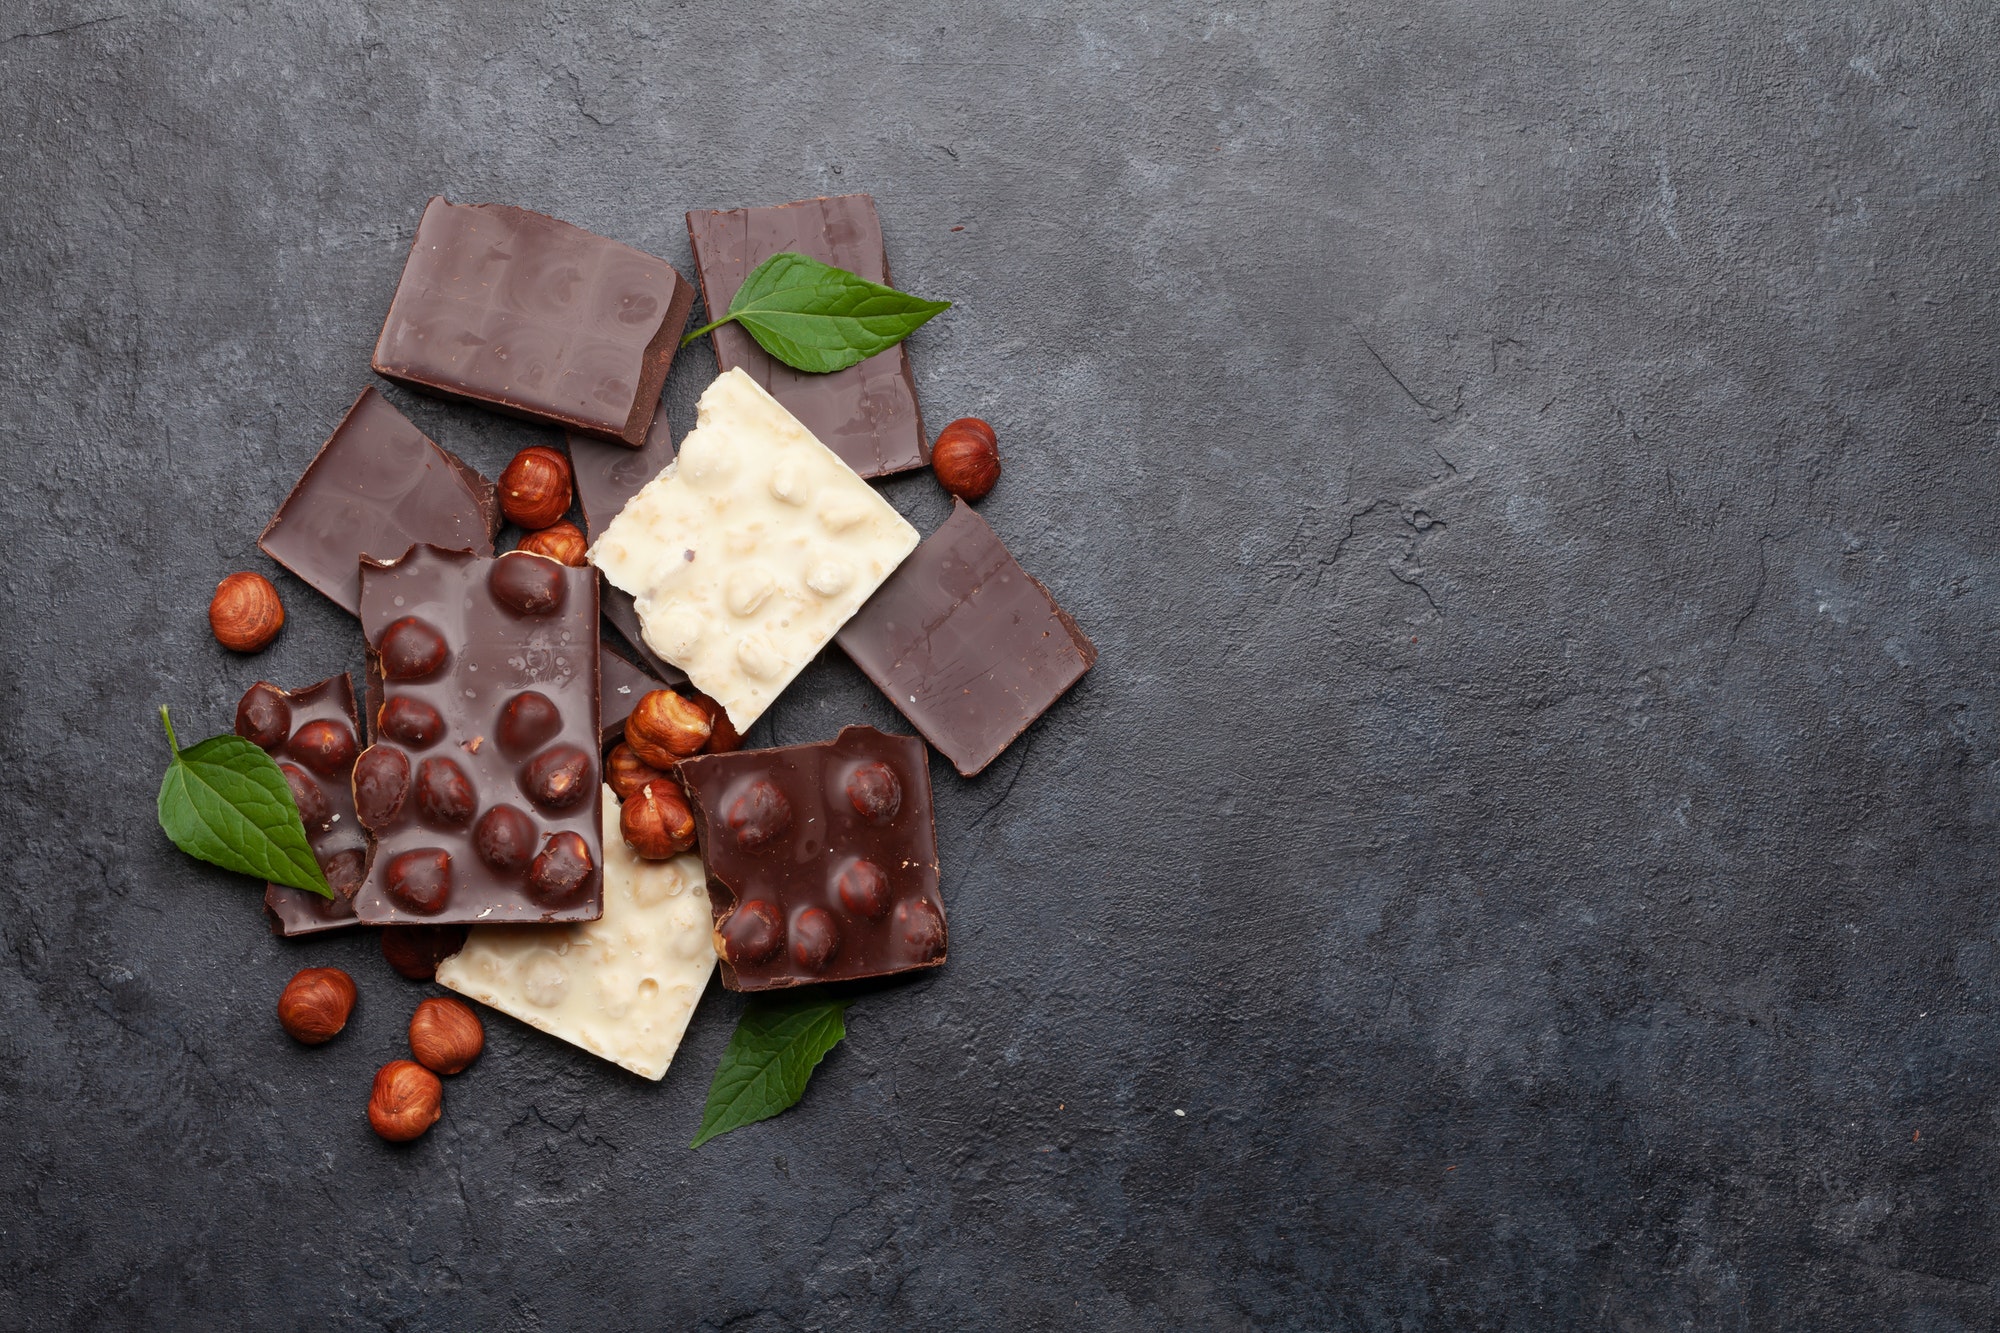 Various chocolate pieces and nuts